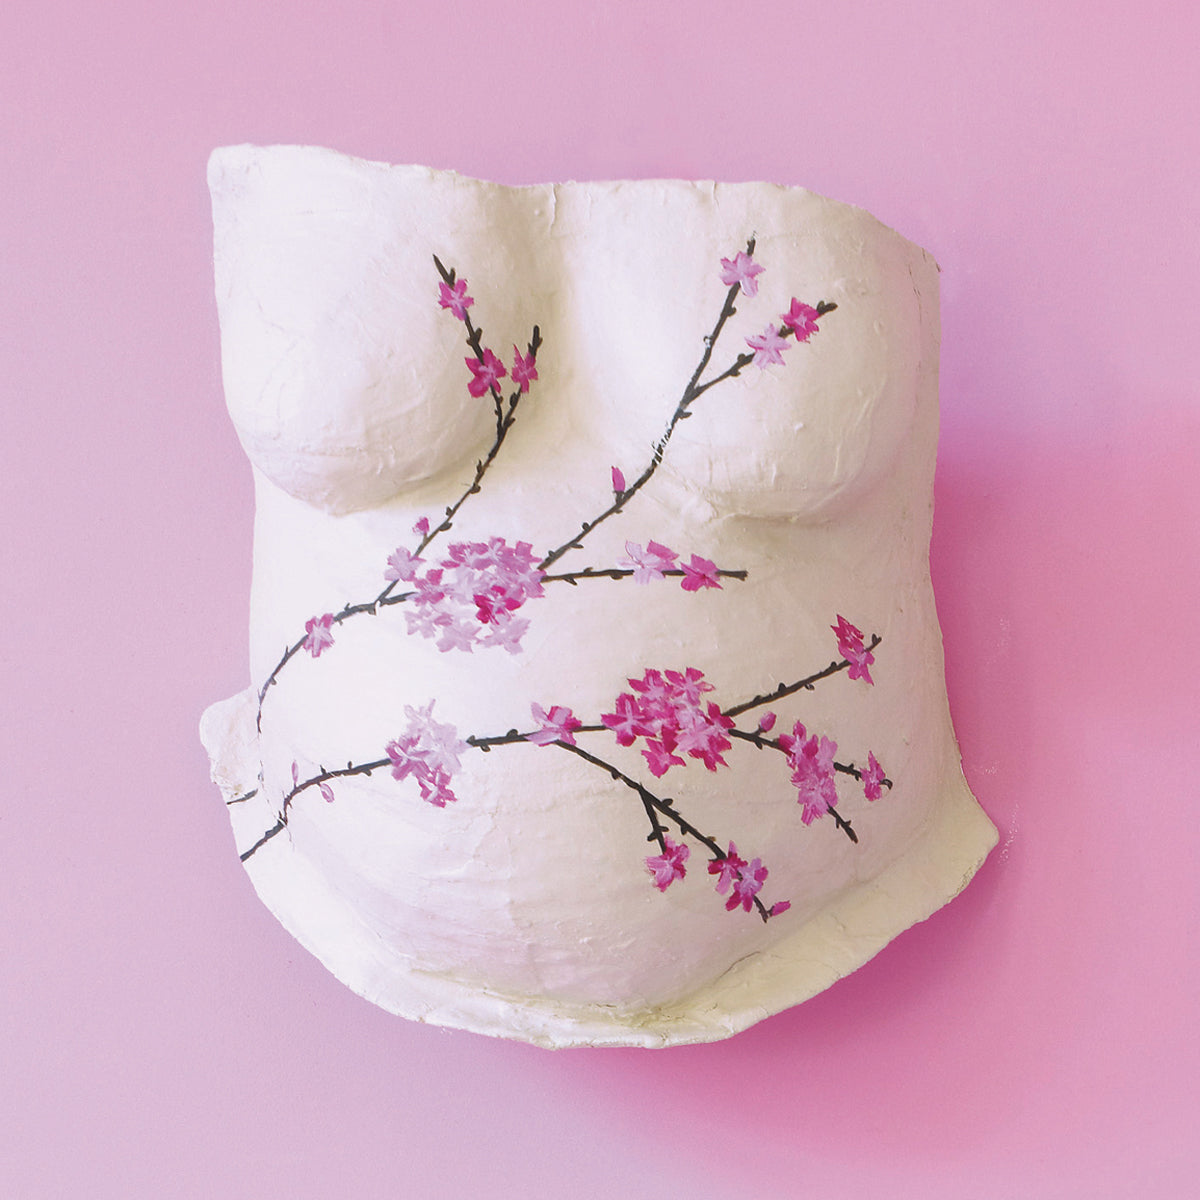 Creating Artwork From a Pregnancy Belly Cast